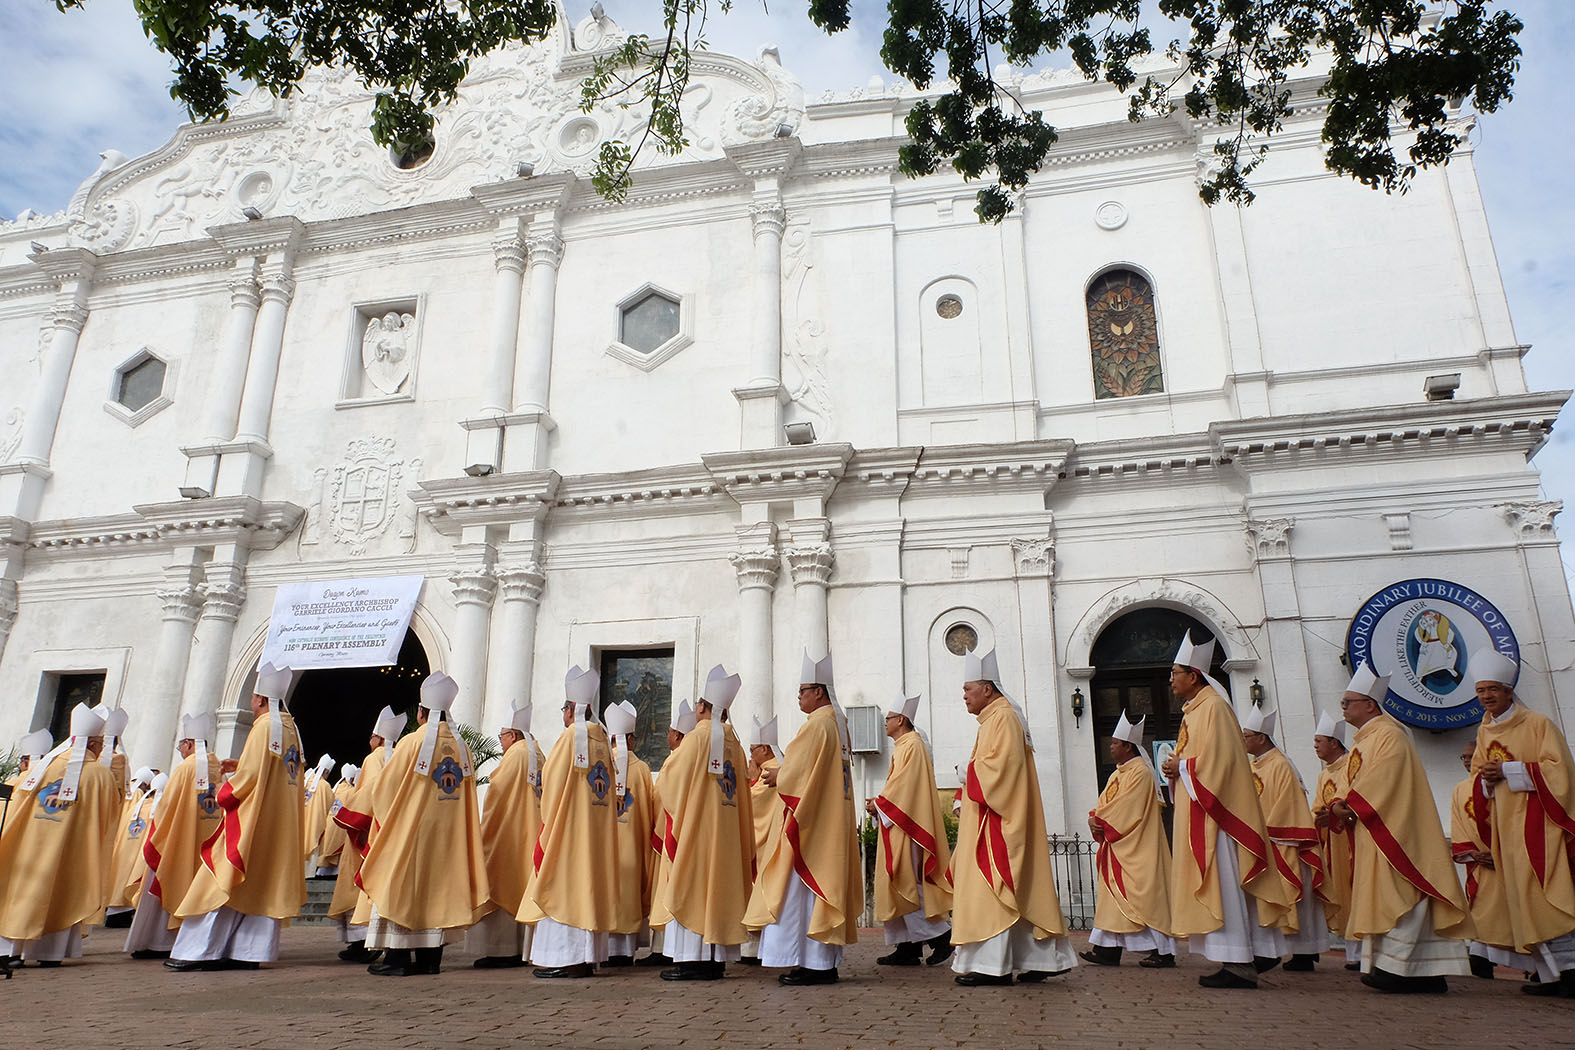 Church pushes back 500 Years of Christianity celebration due to 